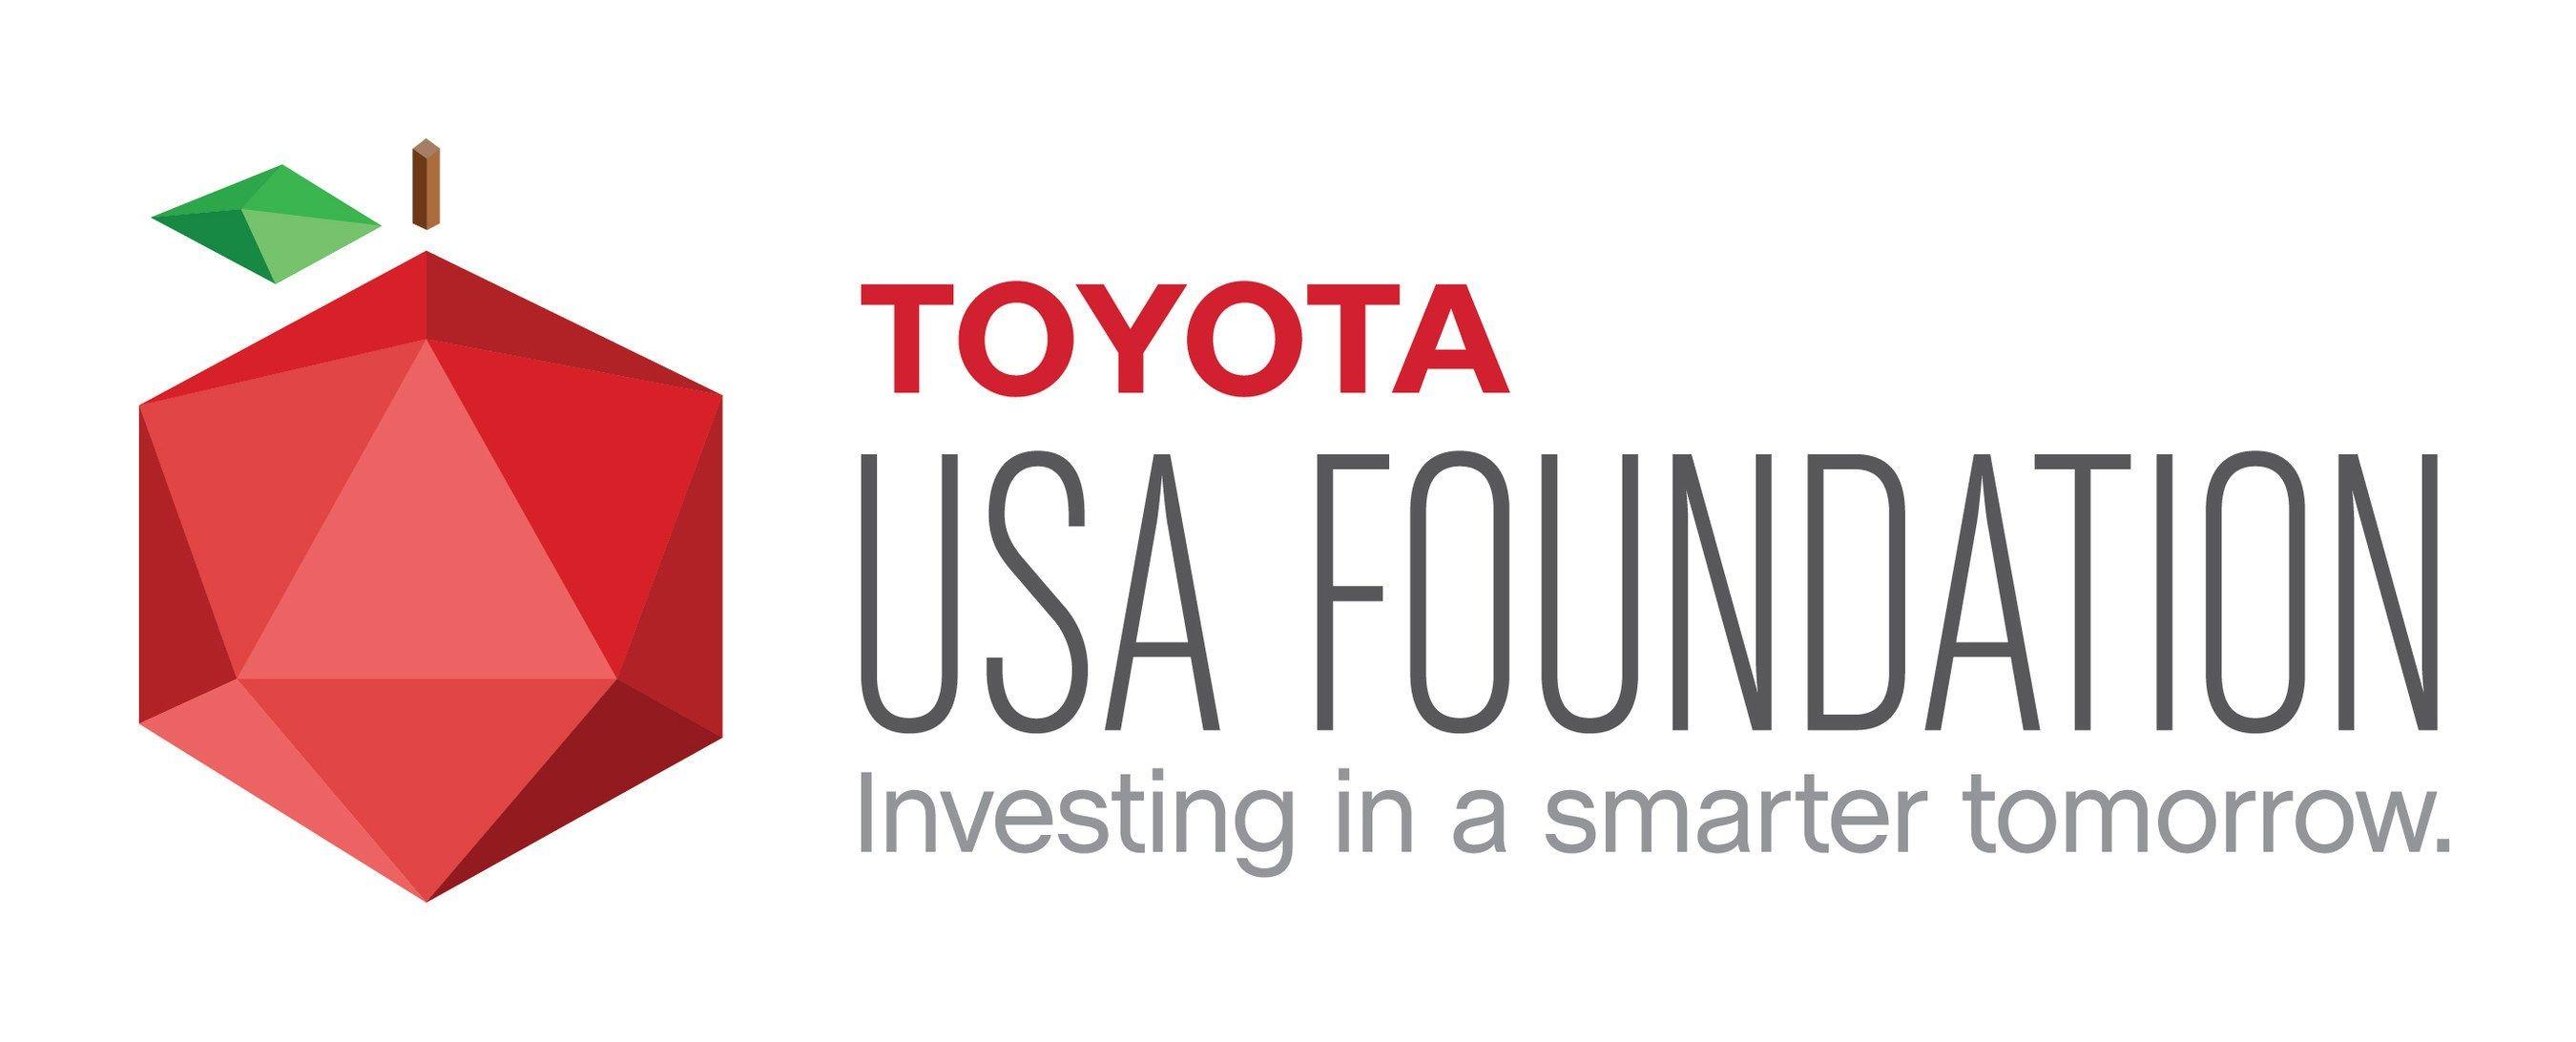 Toyota Triangle Logo - Toyota USA Foundation Continues to Make a Difference | MotorWorld Toyota